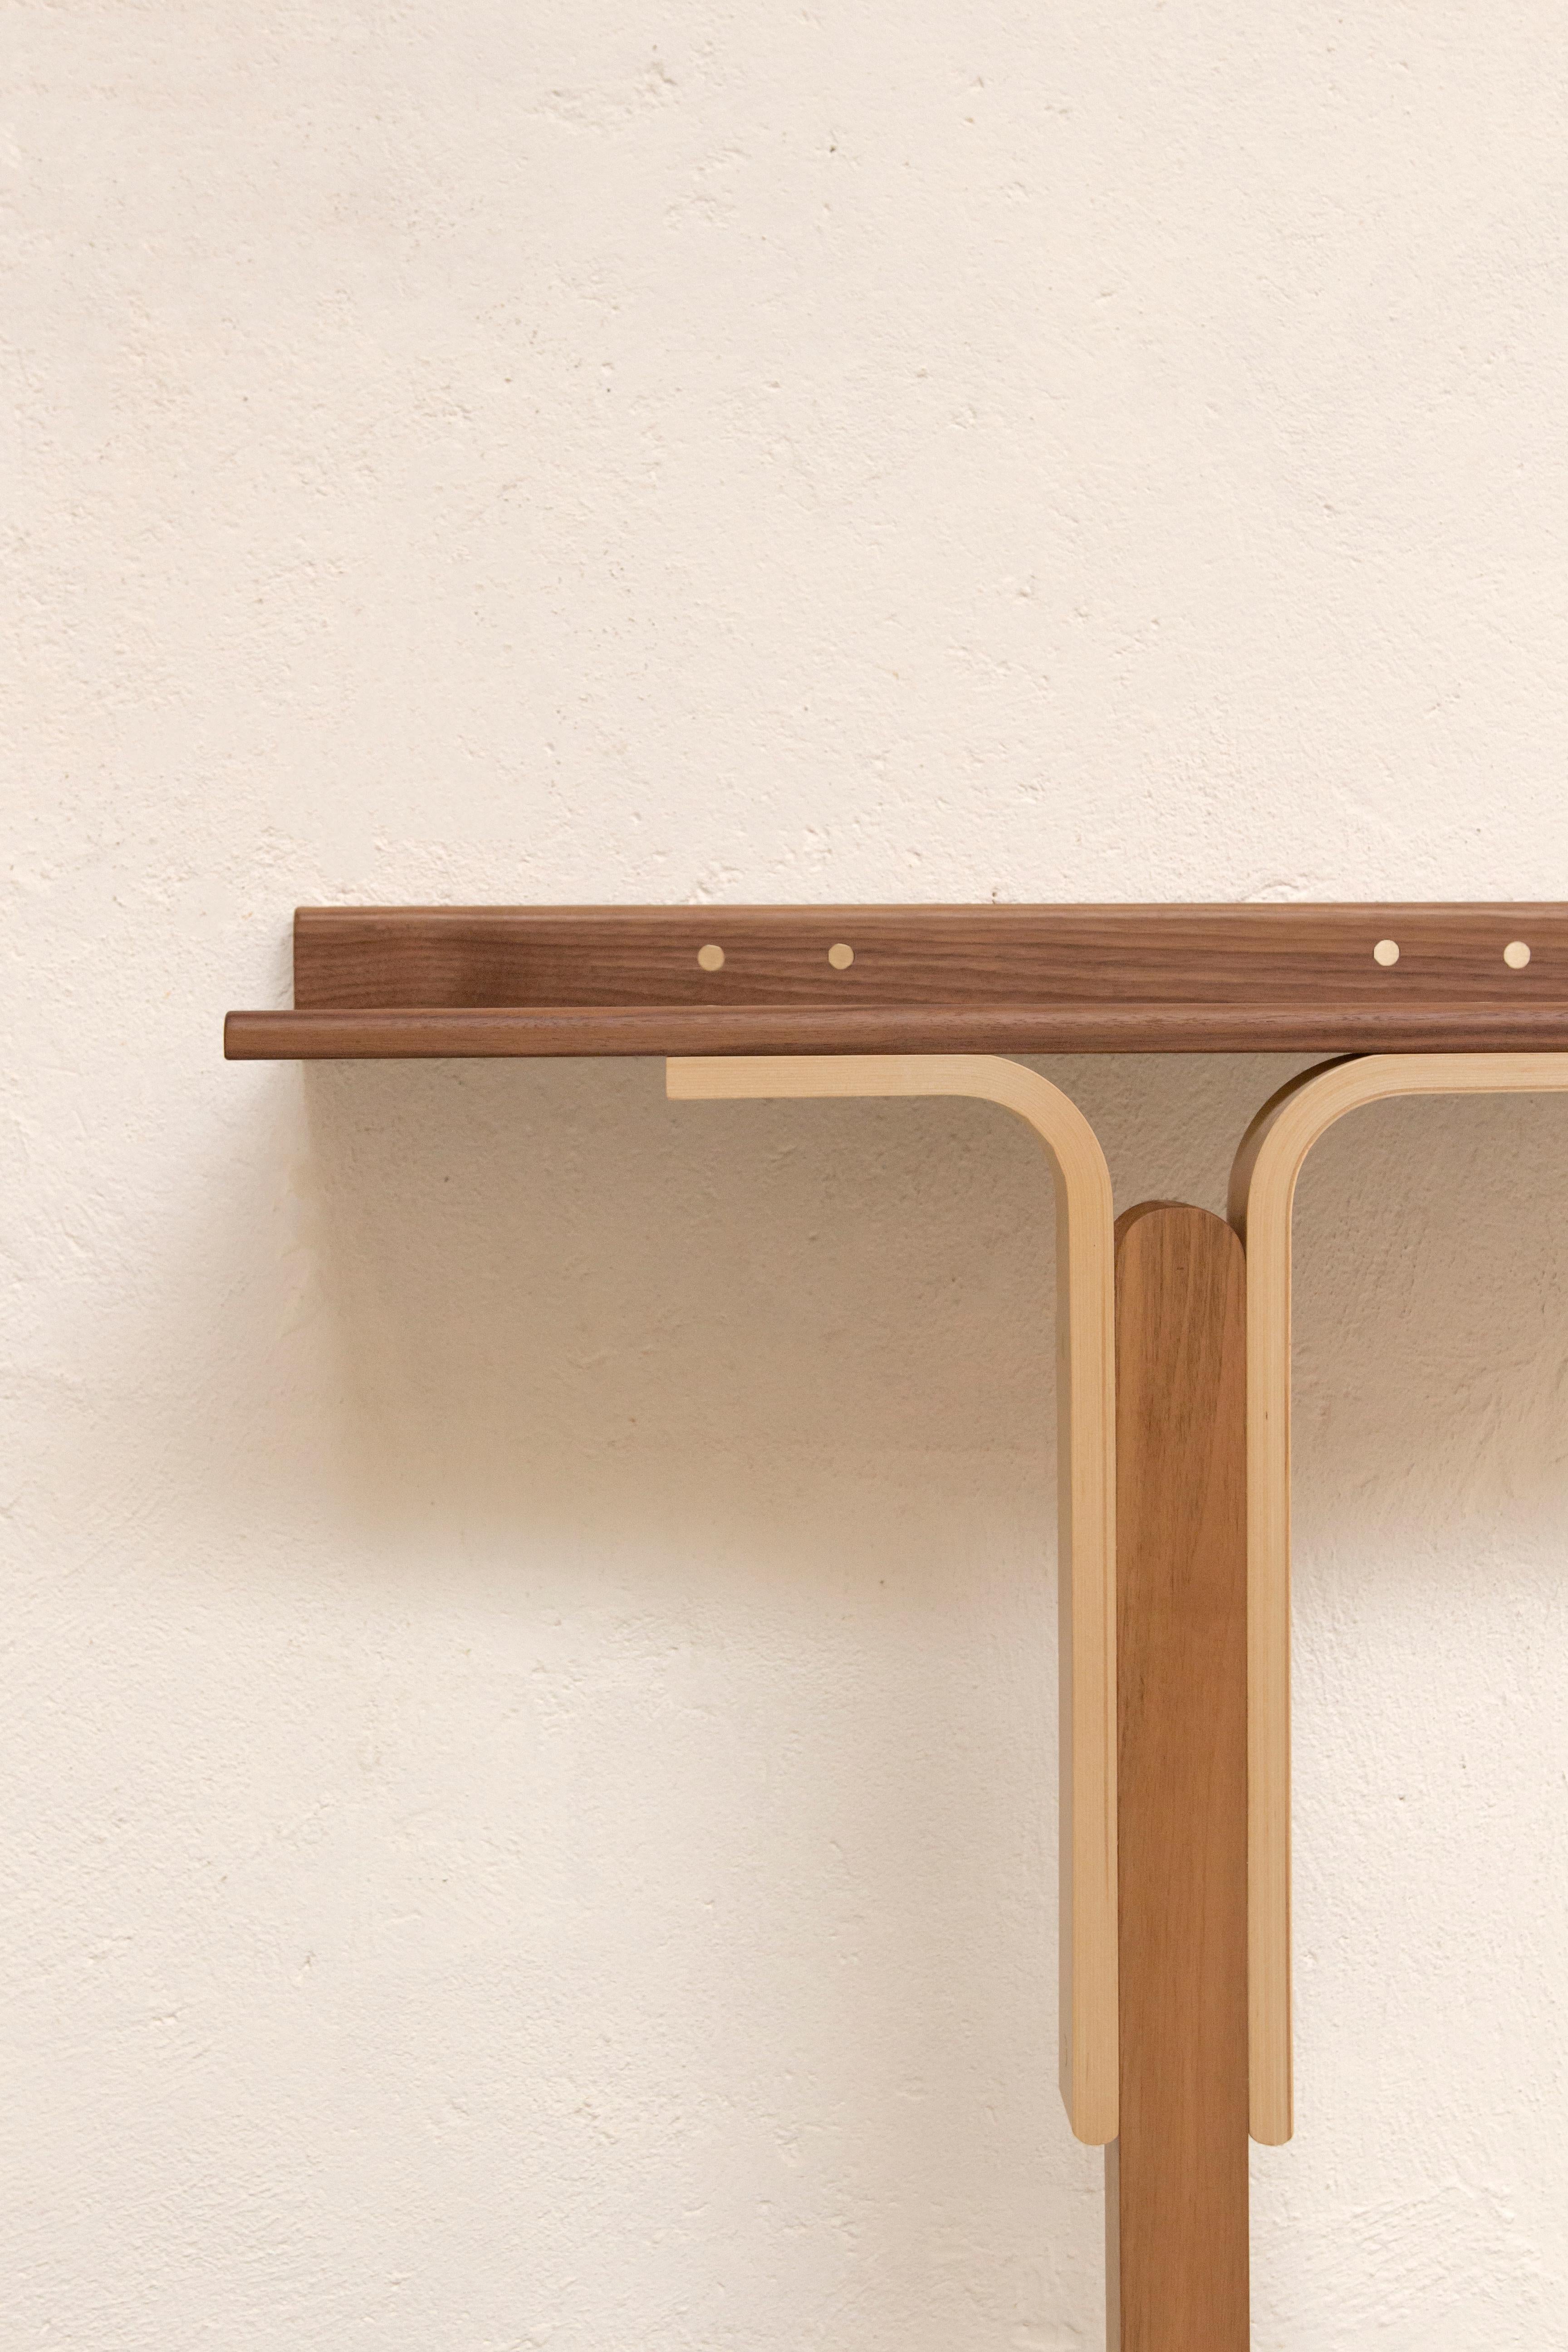 Solid Walnut wood, Ash wood bent elements, brass Joinery
25x80x100 cm 
Designed by Ilaria Bianchi, Handmade in Italy by master capenters 

The elegant 21st-century Rennie console table by Ilaria Bianchi is handcrafted in solid Walnut and Ash wood